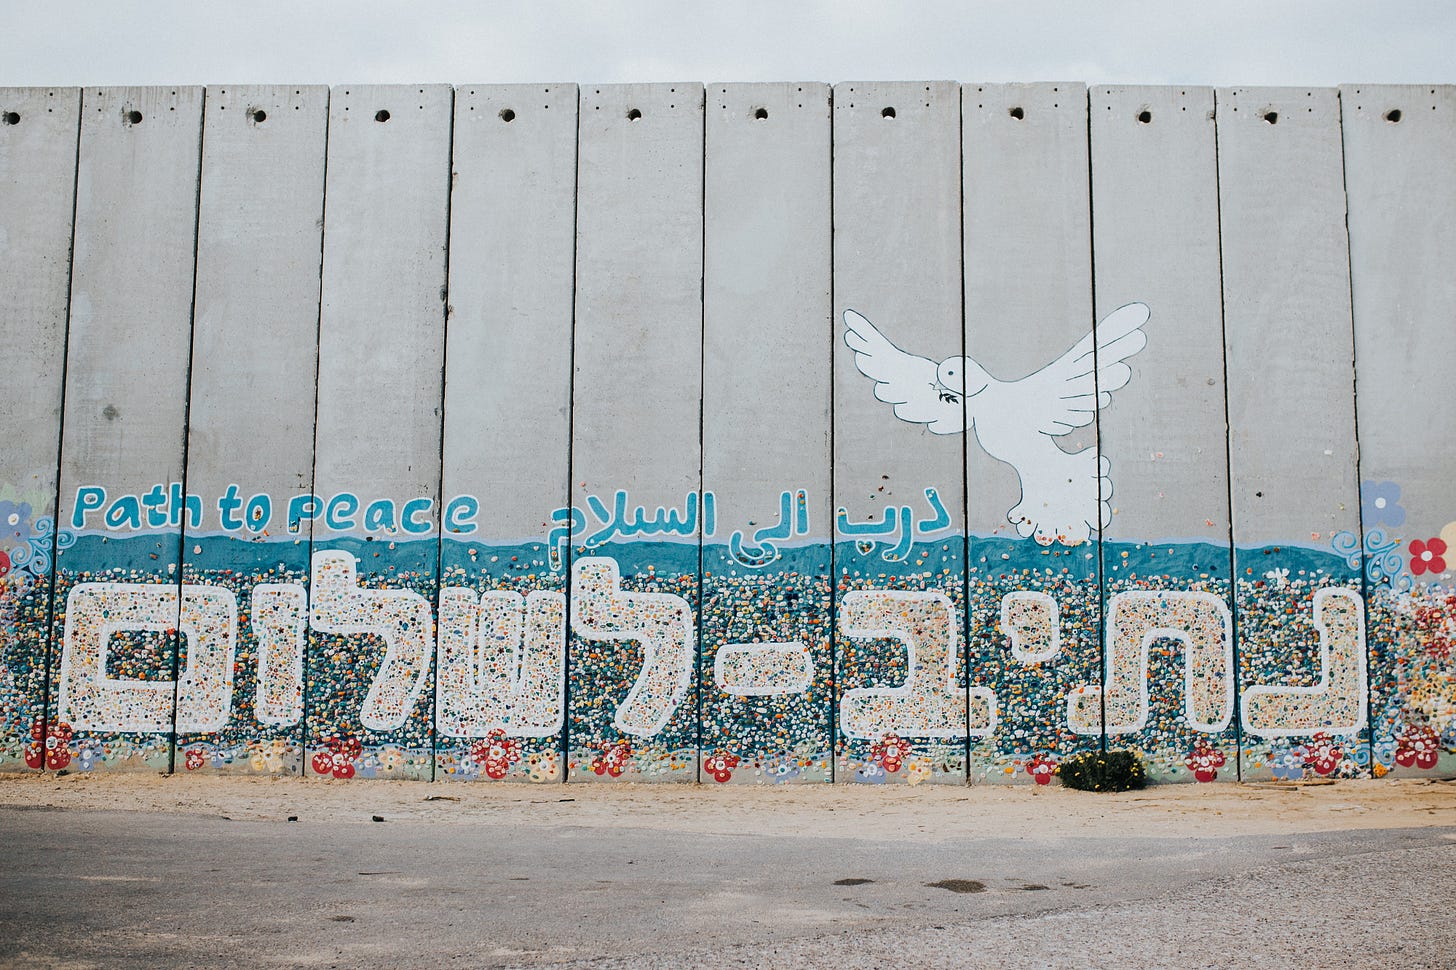 “Path to Peace” wall art painting in English, Arabic, and Hebrew with a dov e— in Netiv HaAsara facing the Gaza border